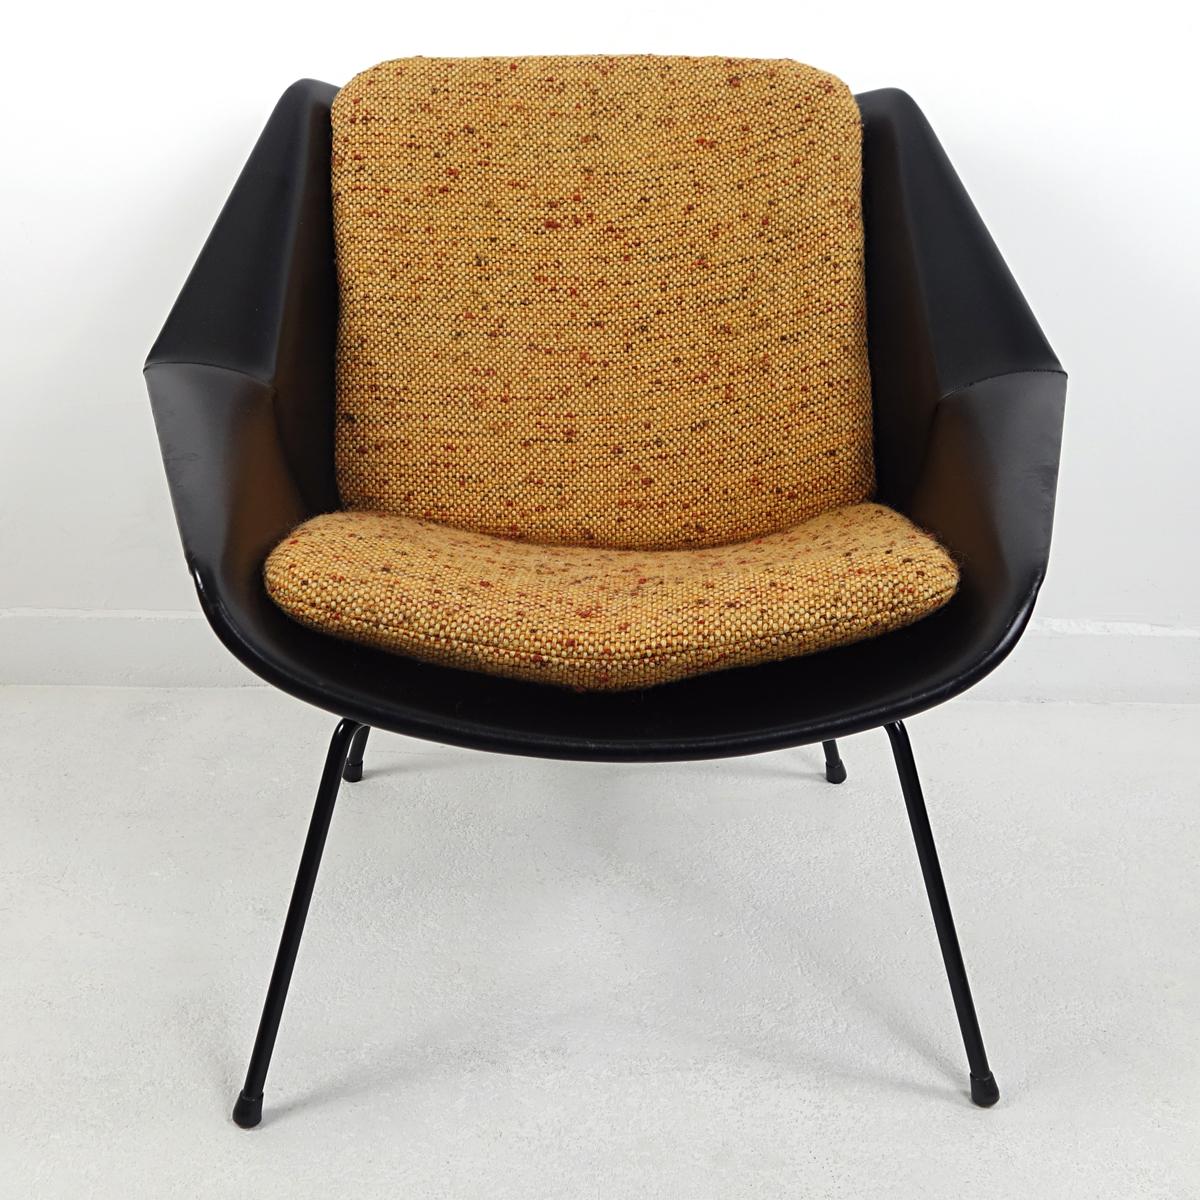 This easy chair was designed by Cees Braakman in the 1950s for famous Dutch furniture manufacturer Pastoe. Its shell is covered in black vinyl, standing on four elegantly shaped black steel legs. The shell holds two loose cushions upholstered with a